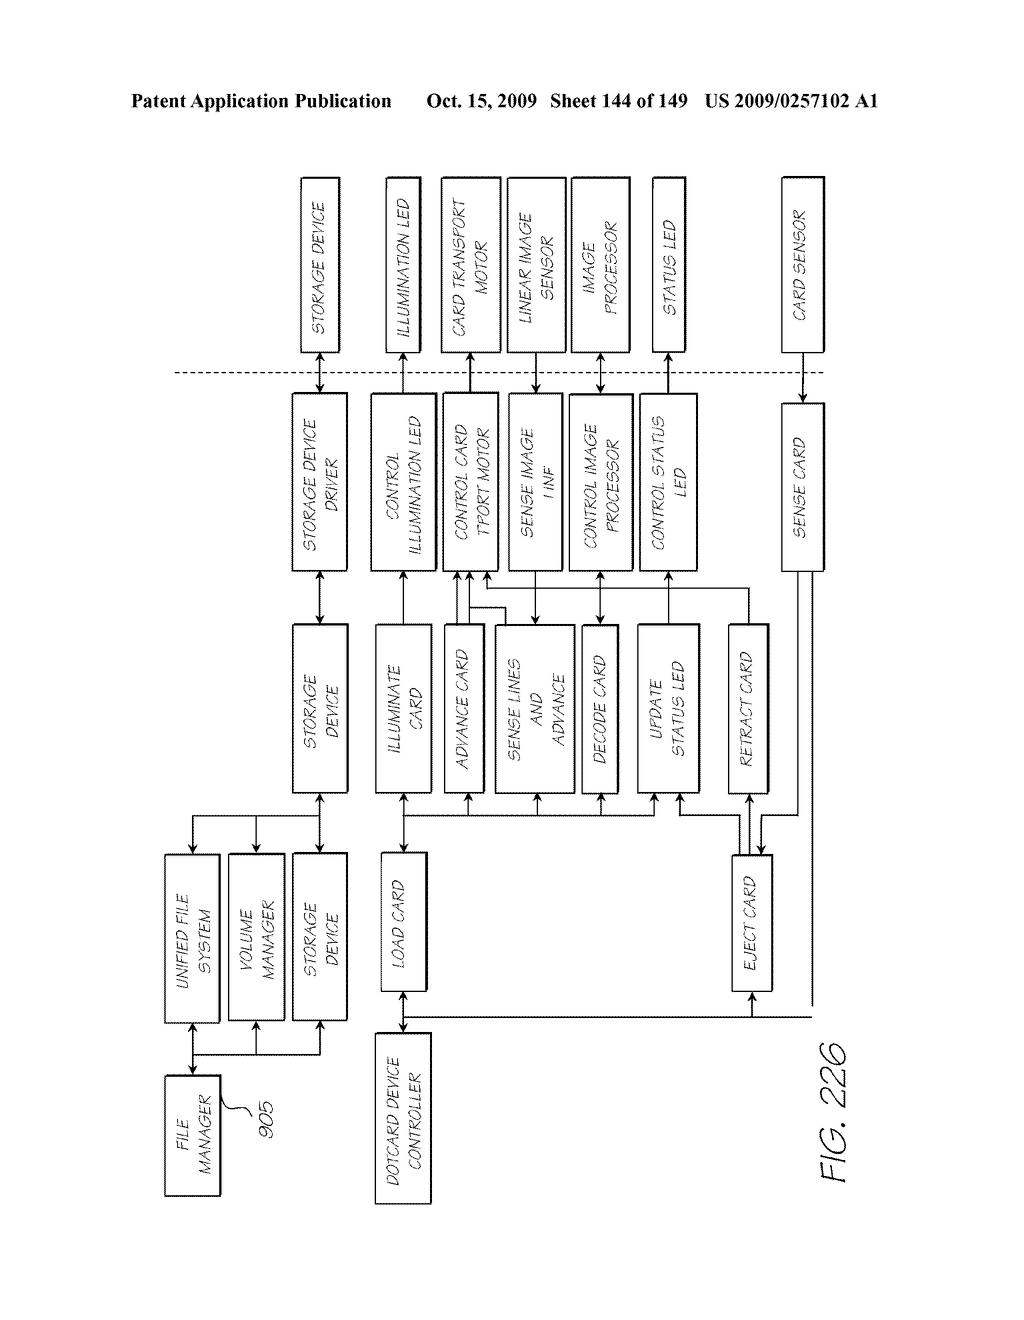 IMAGE PROCESSING APPARATUS HAVING CARD READER FOR APPLYING EFFECTS STORED ON A CARD TO A STORED IMAGE - diagram, schematic, and image 145